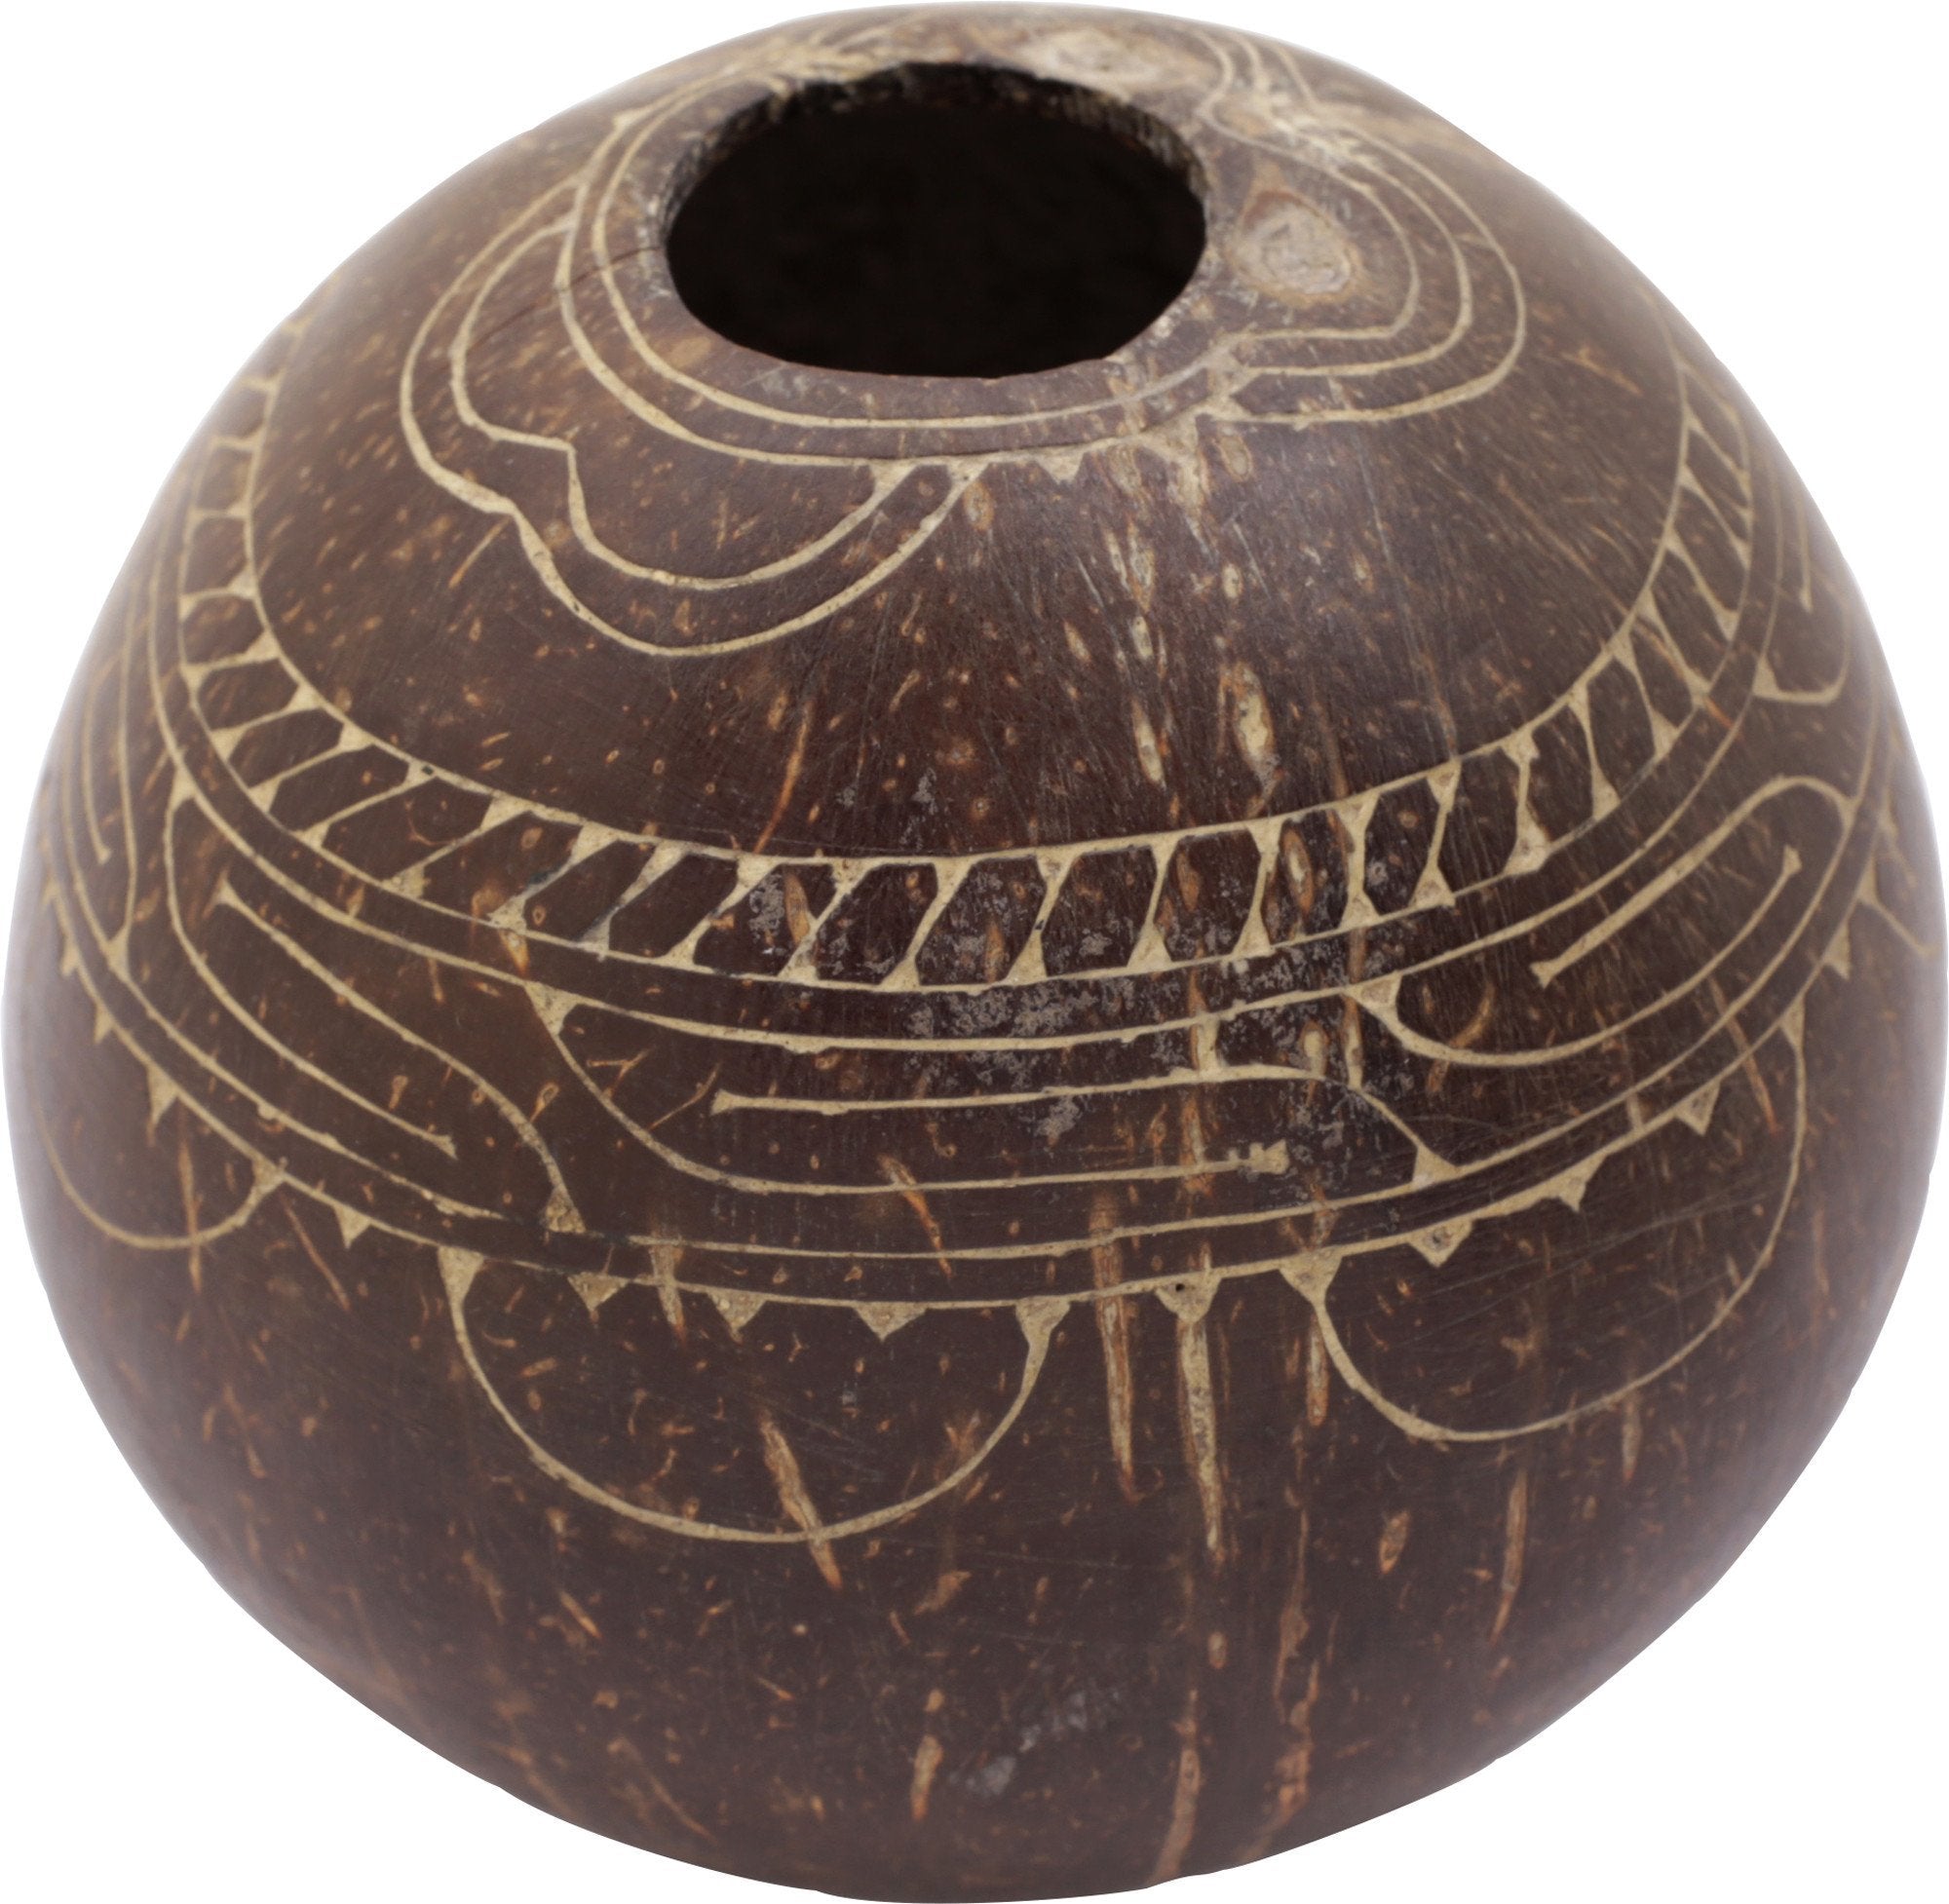 NEW GUINEA CANNIBAL'S LIME CONTAINER - Fagan Arms